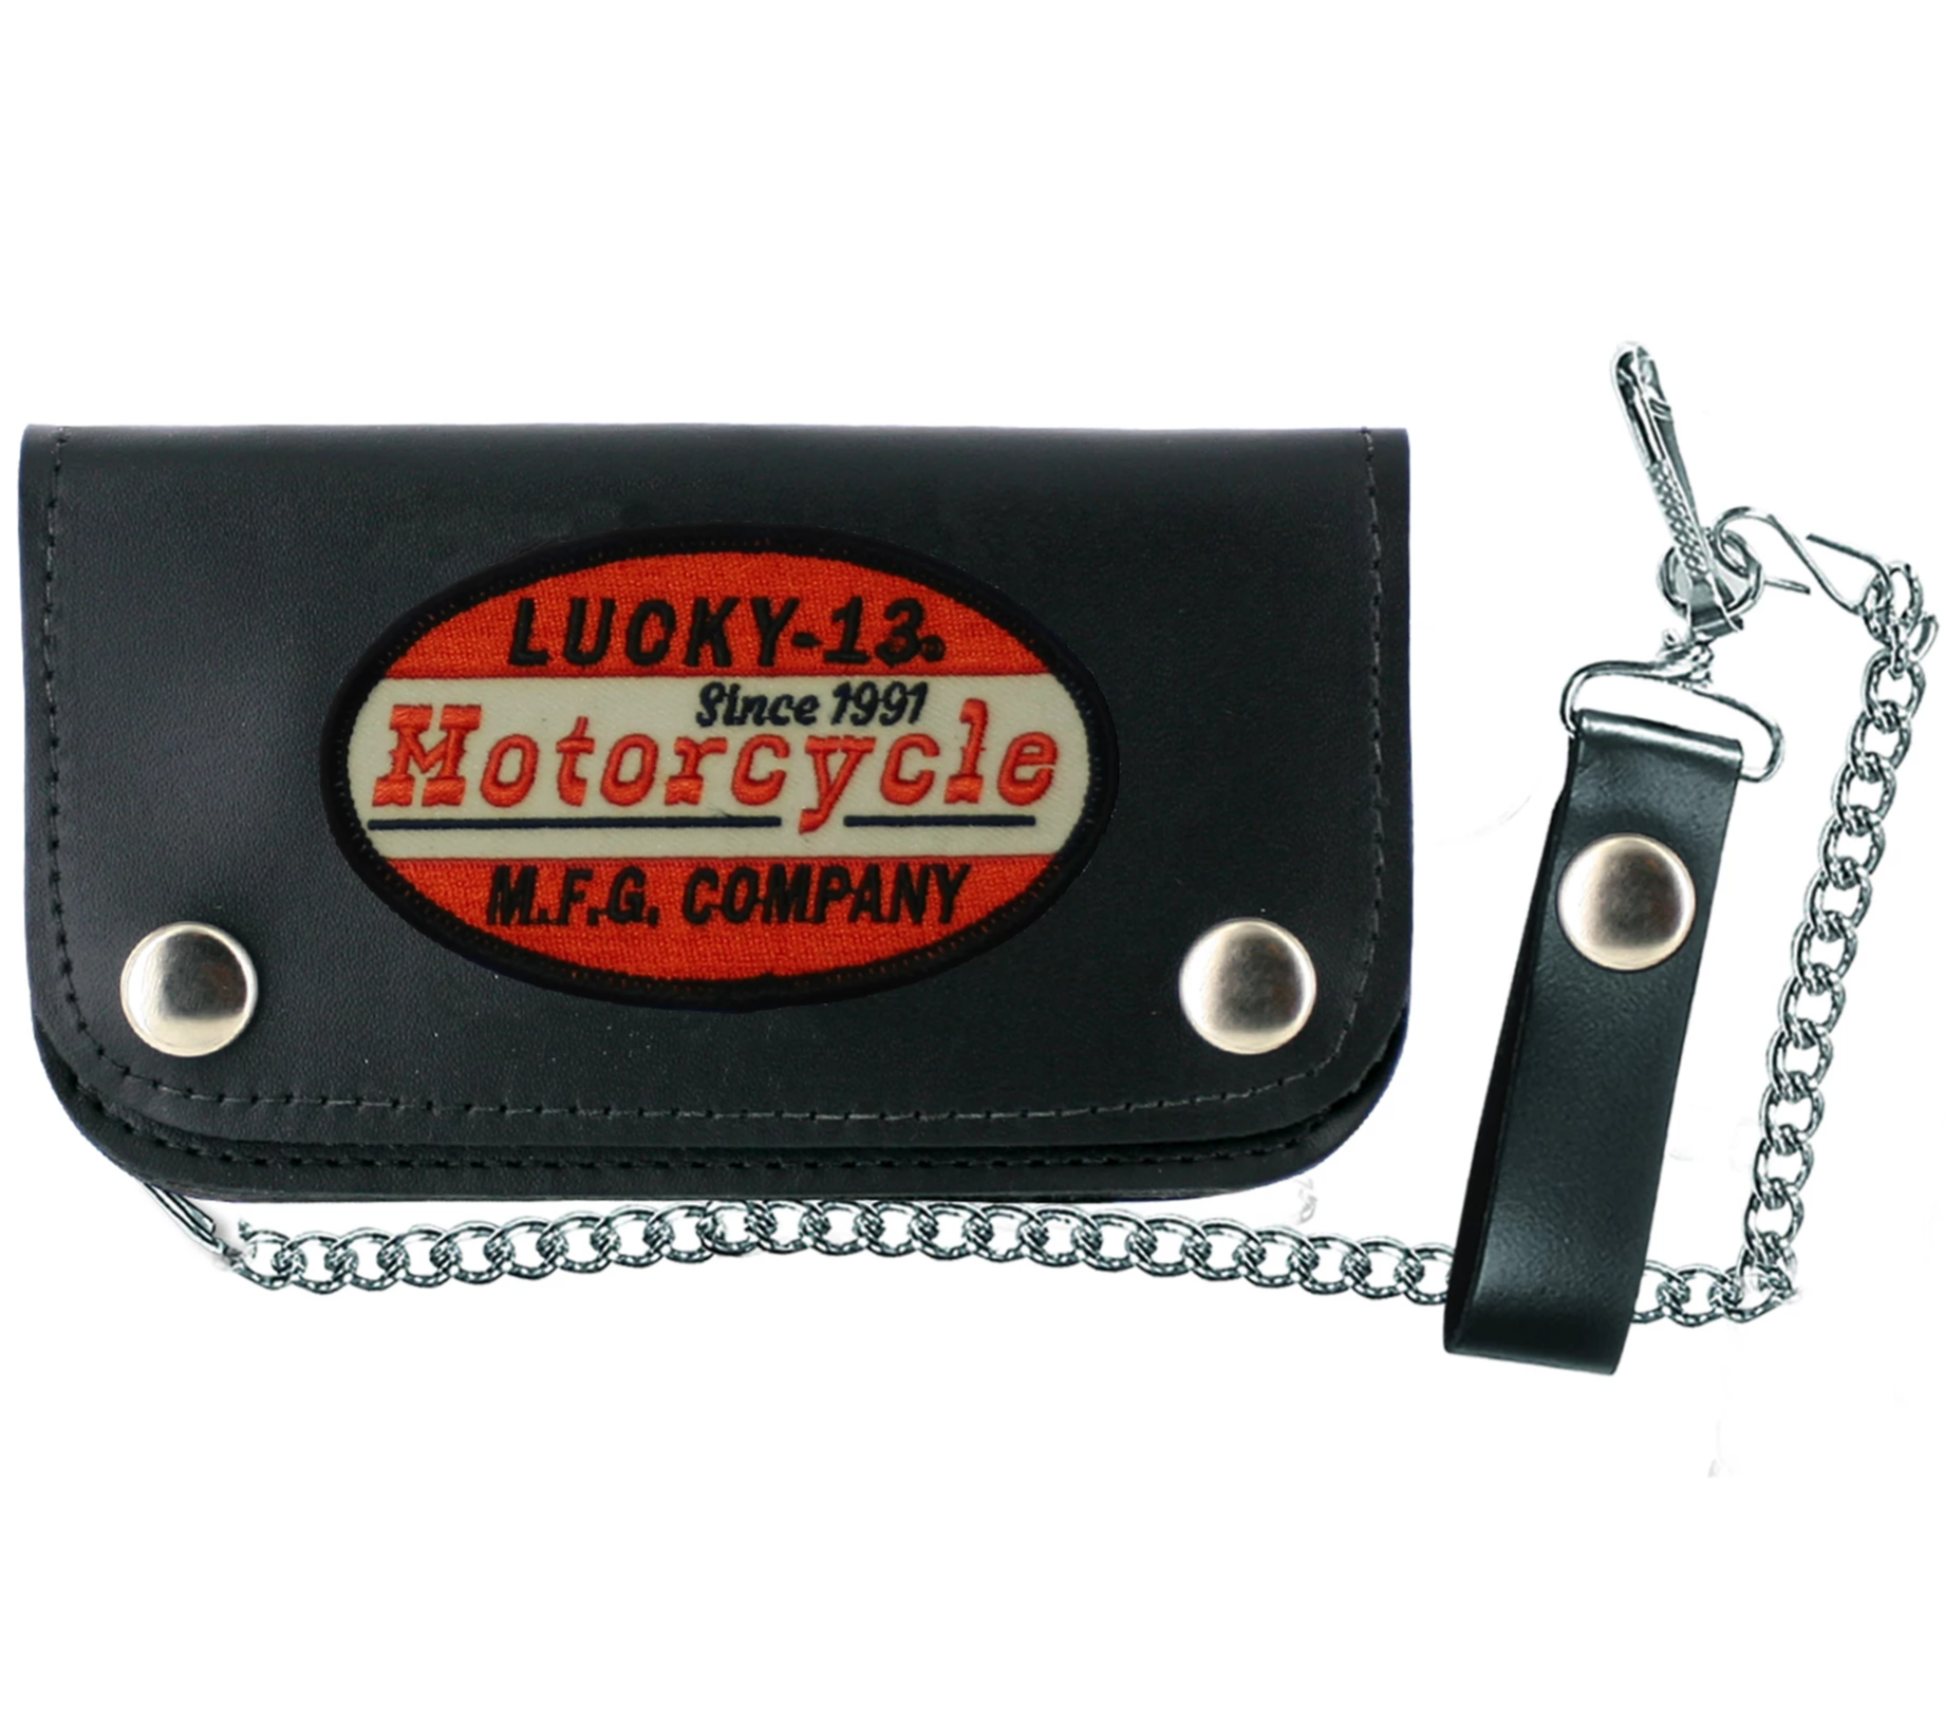 The MOTO-13 Genuine Leather Wallet